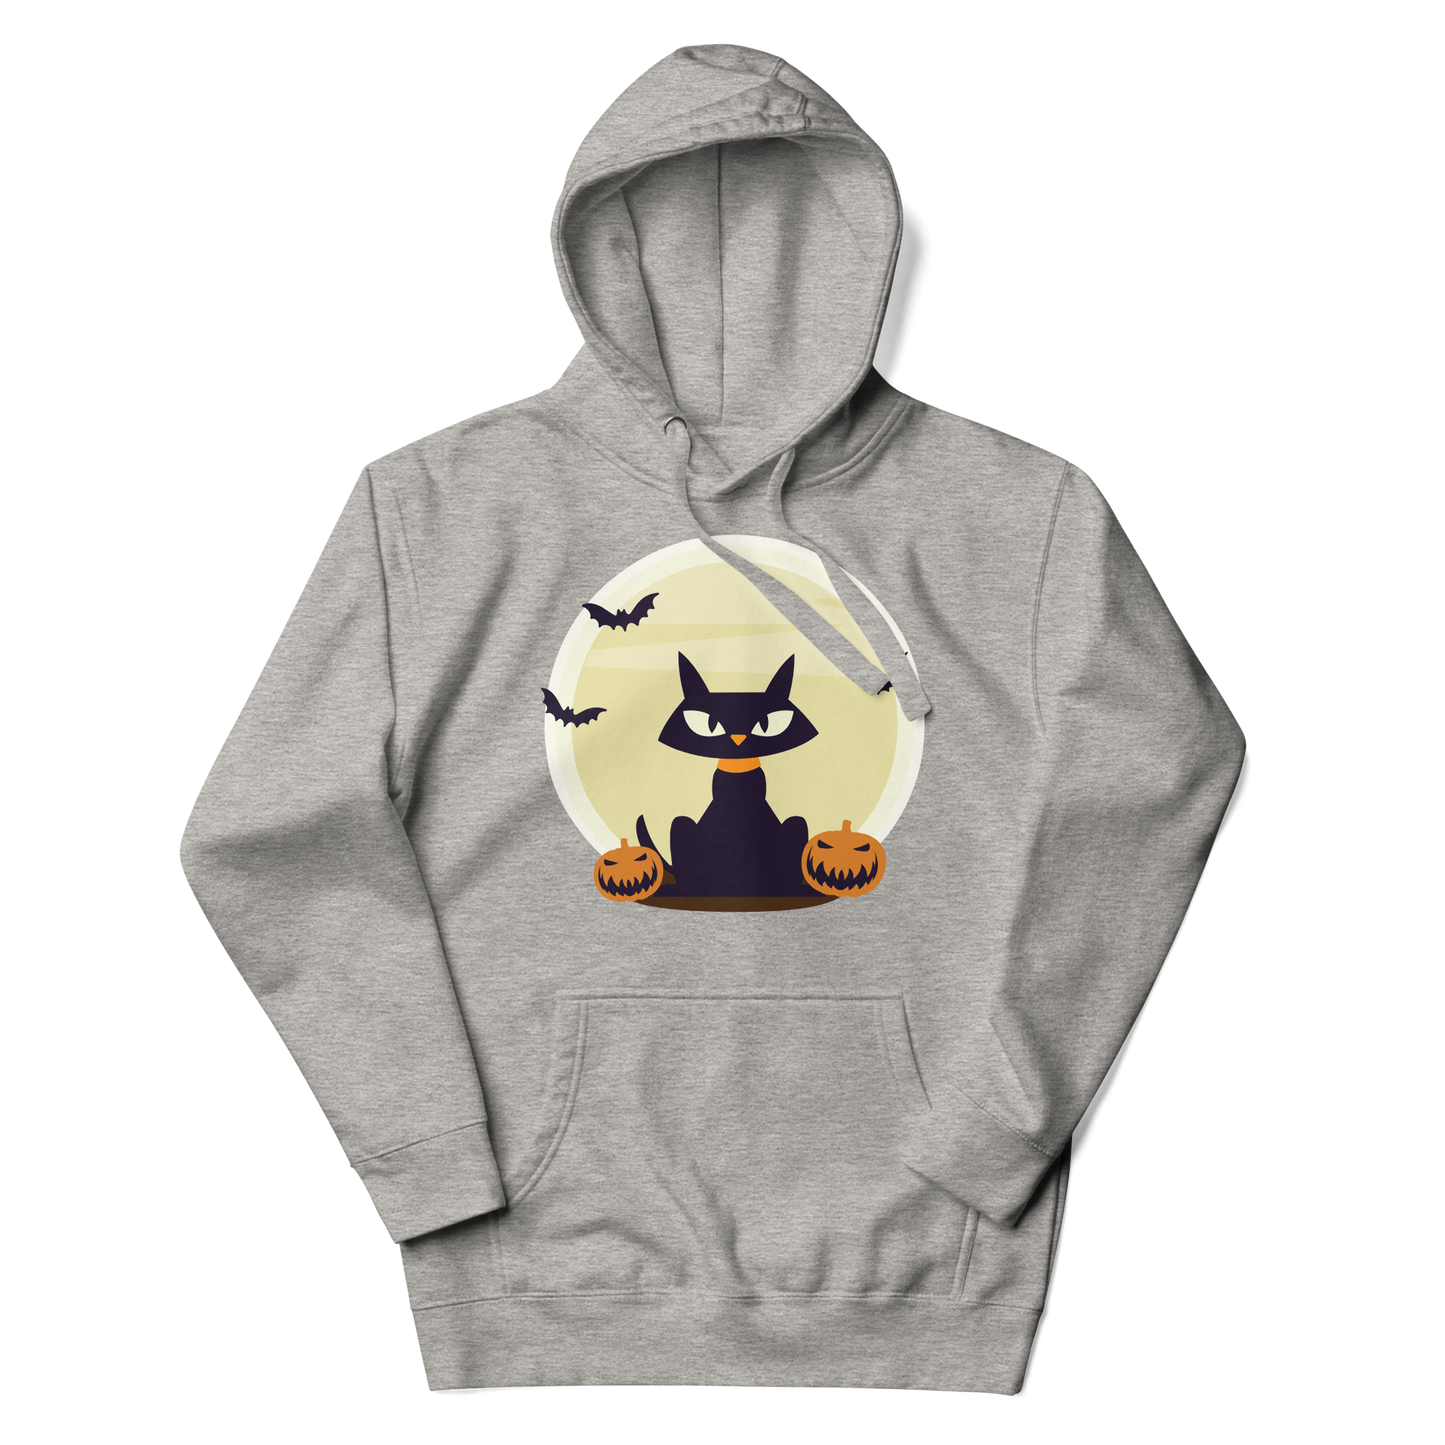 Black cat between two pumpkins and couple of bats flying over full moon | Unisex Hoodie